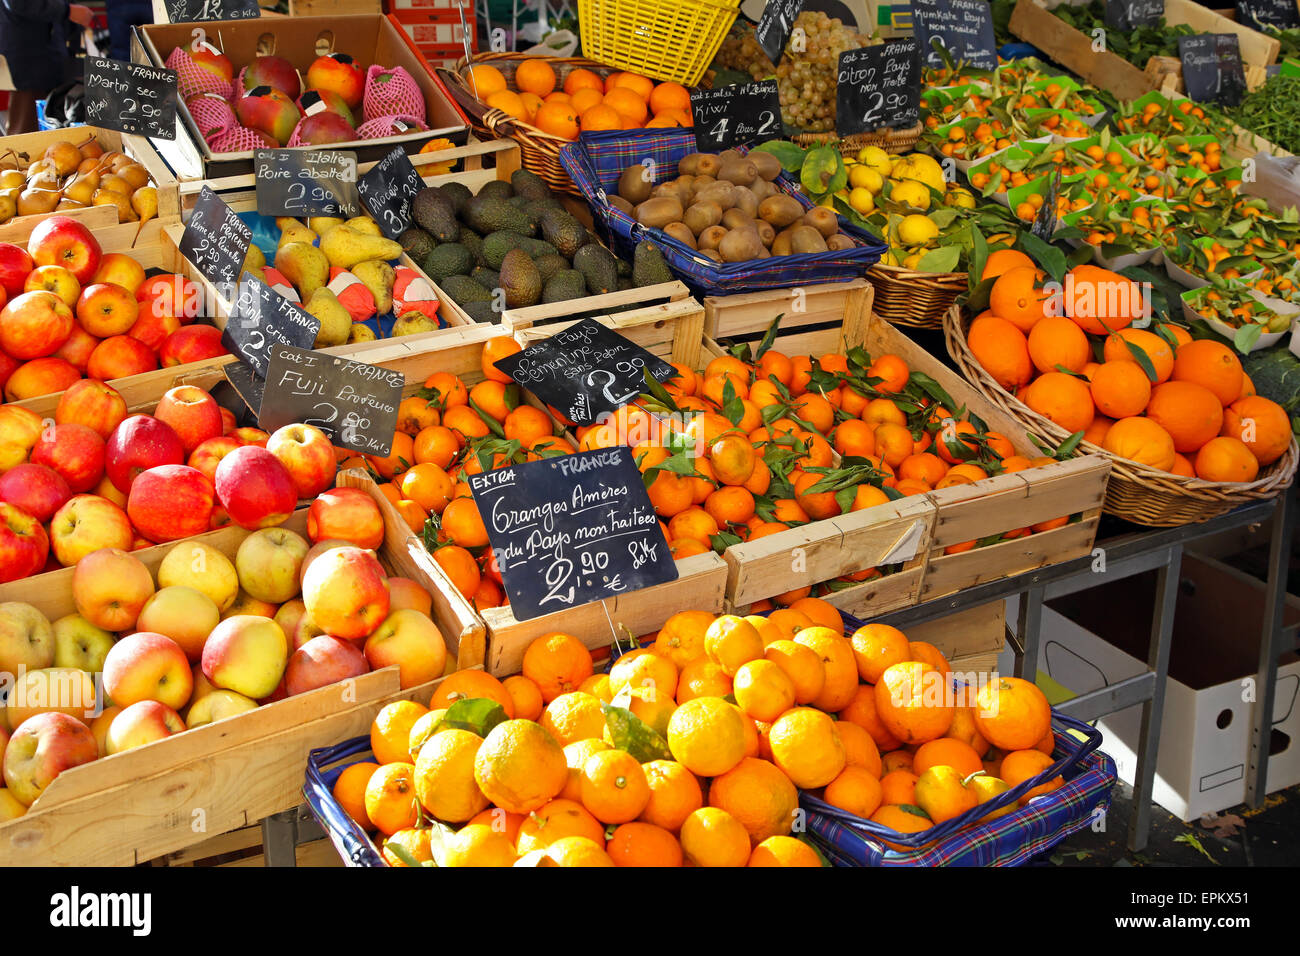 Fresh fruits and vegetables at market stall Stock Photo